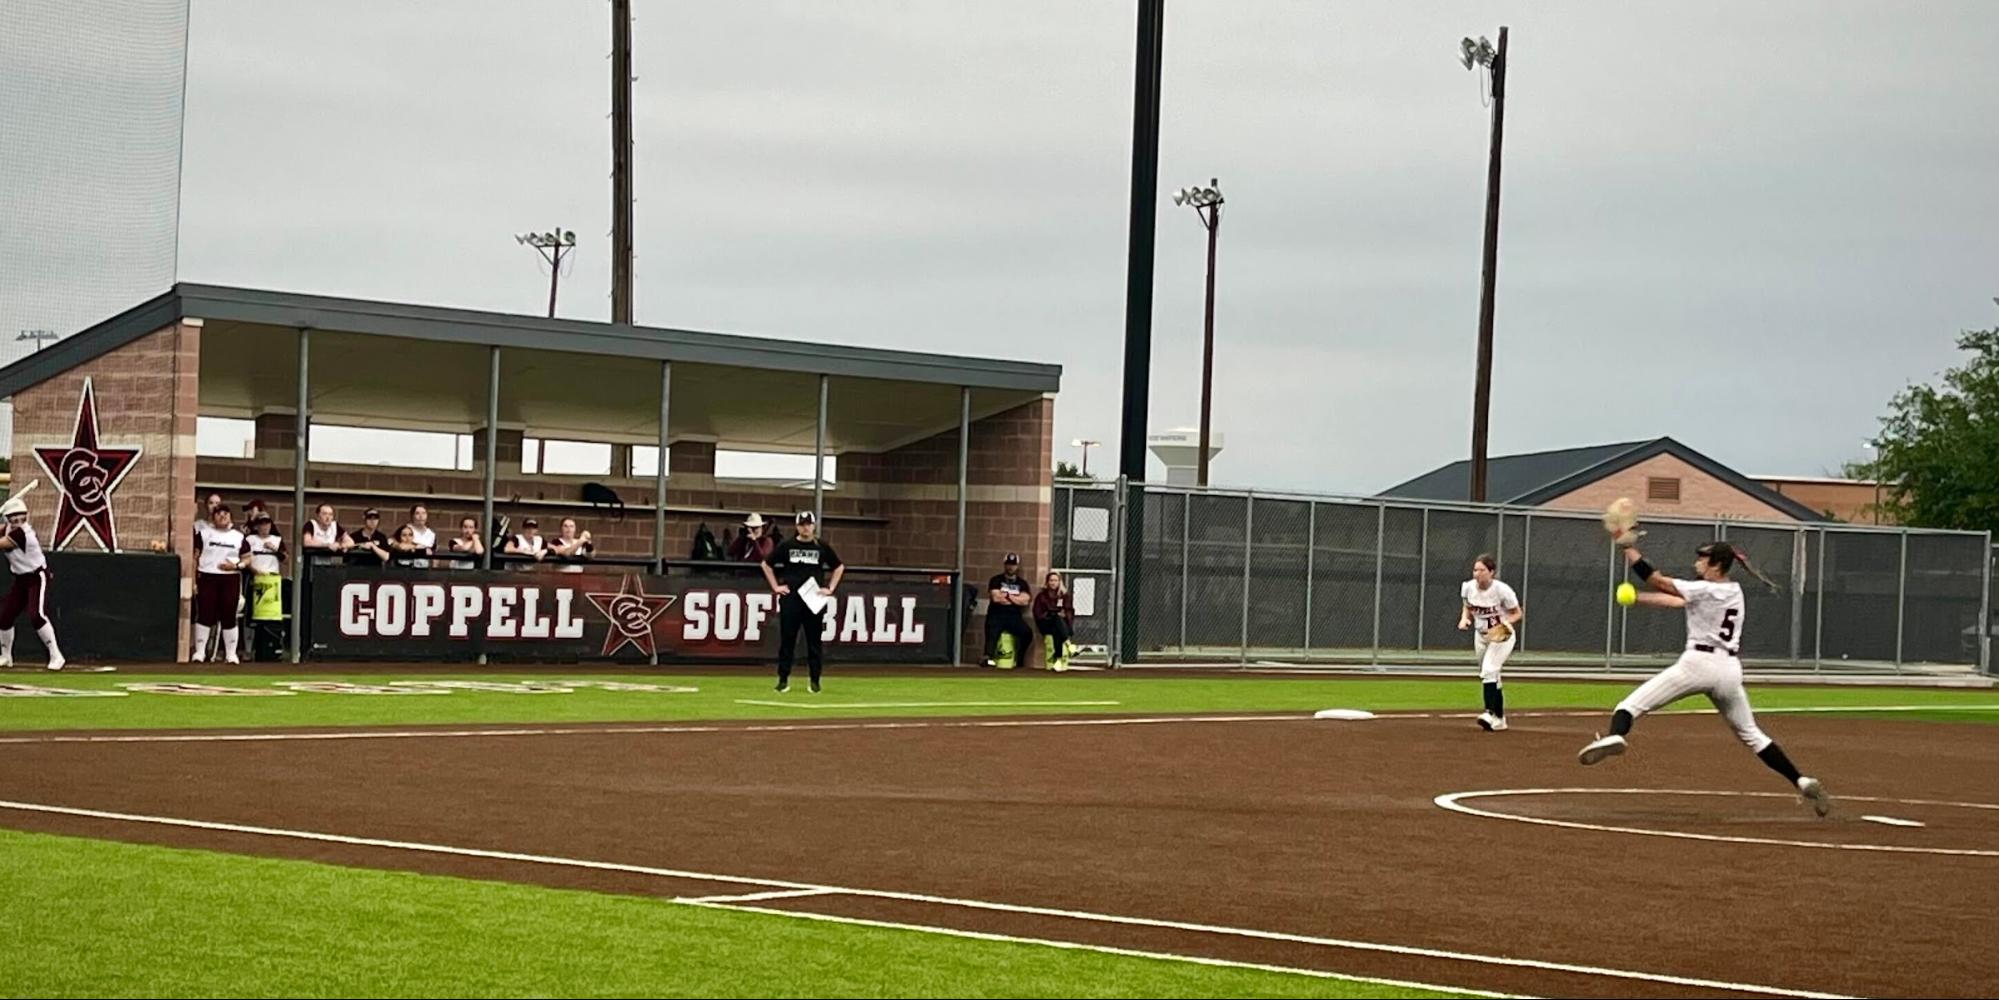 Coppell Softball: Cowgirls’ Exciting 9-8 Victory Concludes Season with Pitching excellence and Offensive Power